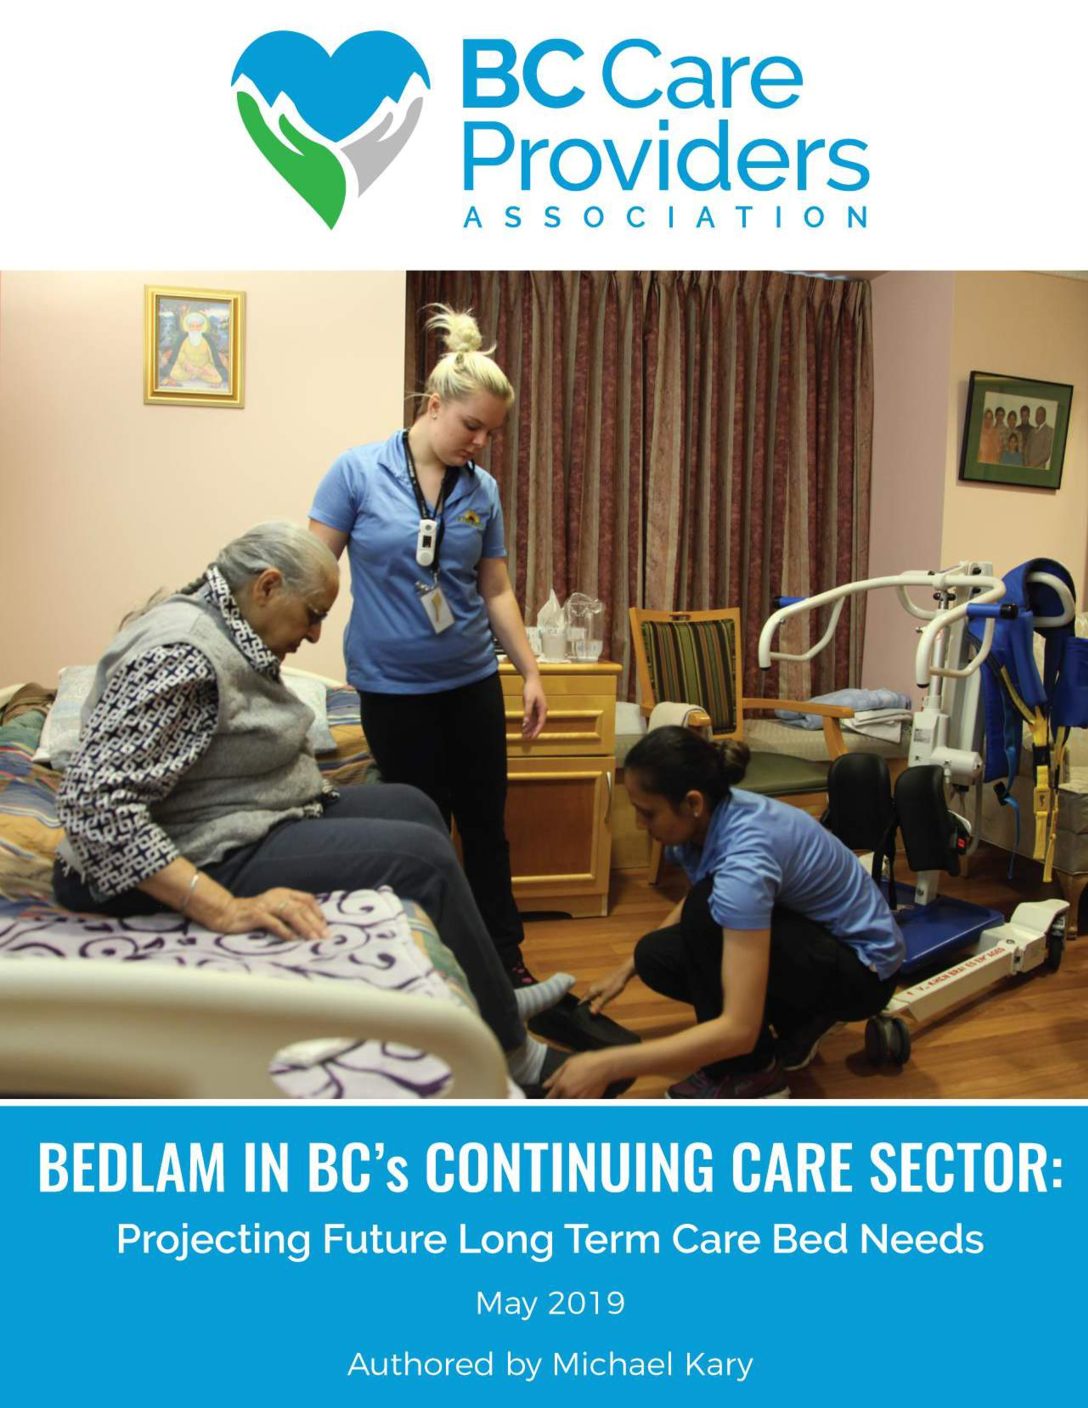 Bedlam in BC's Continuing Care Sector